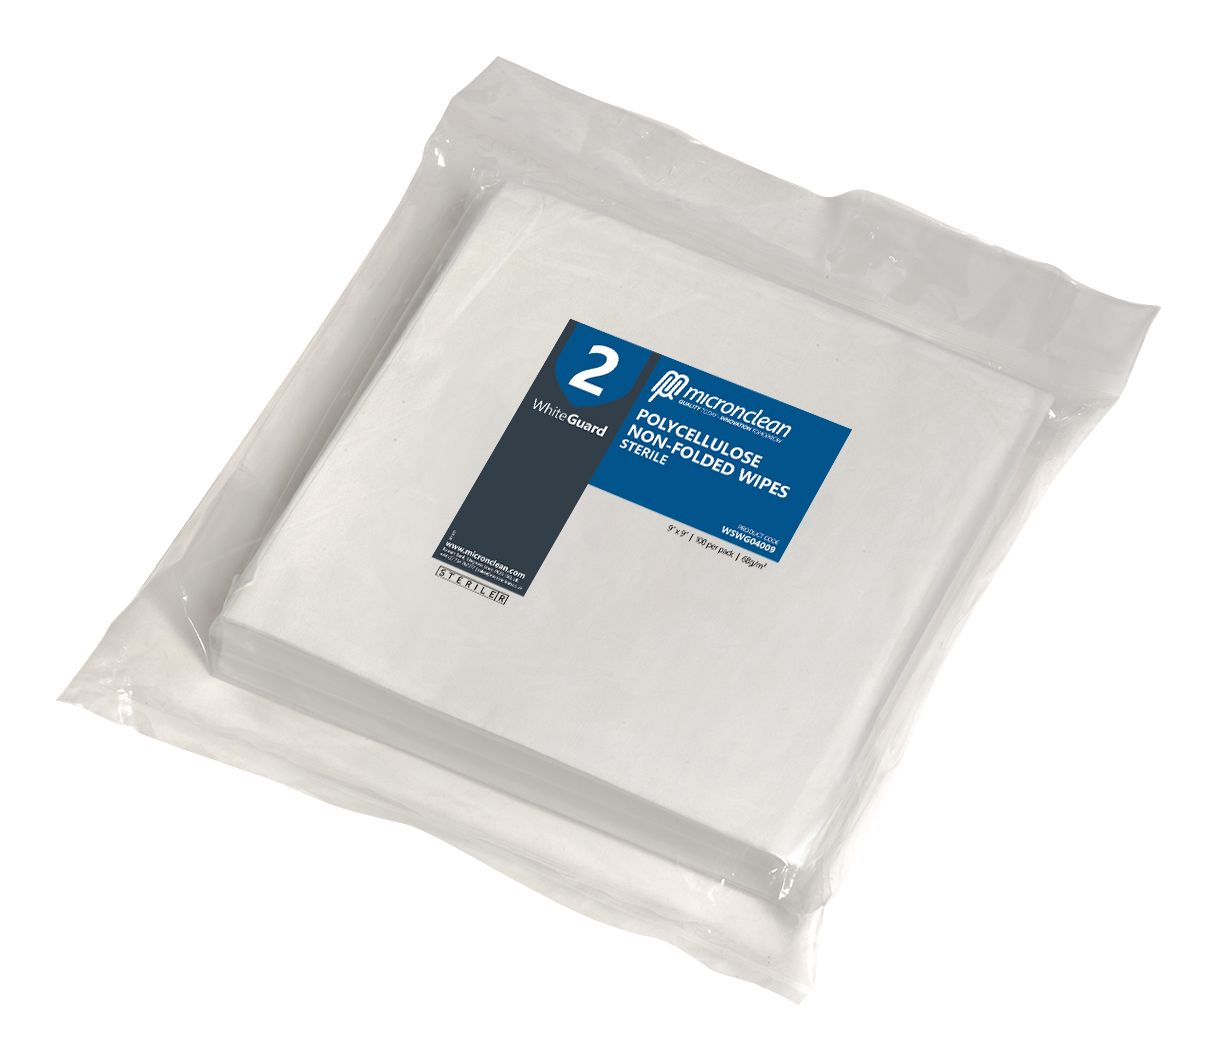 WhiteGuard 2 Polycellulose Wipes Sterile